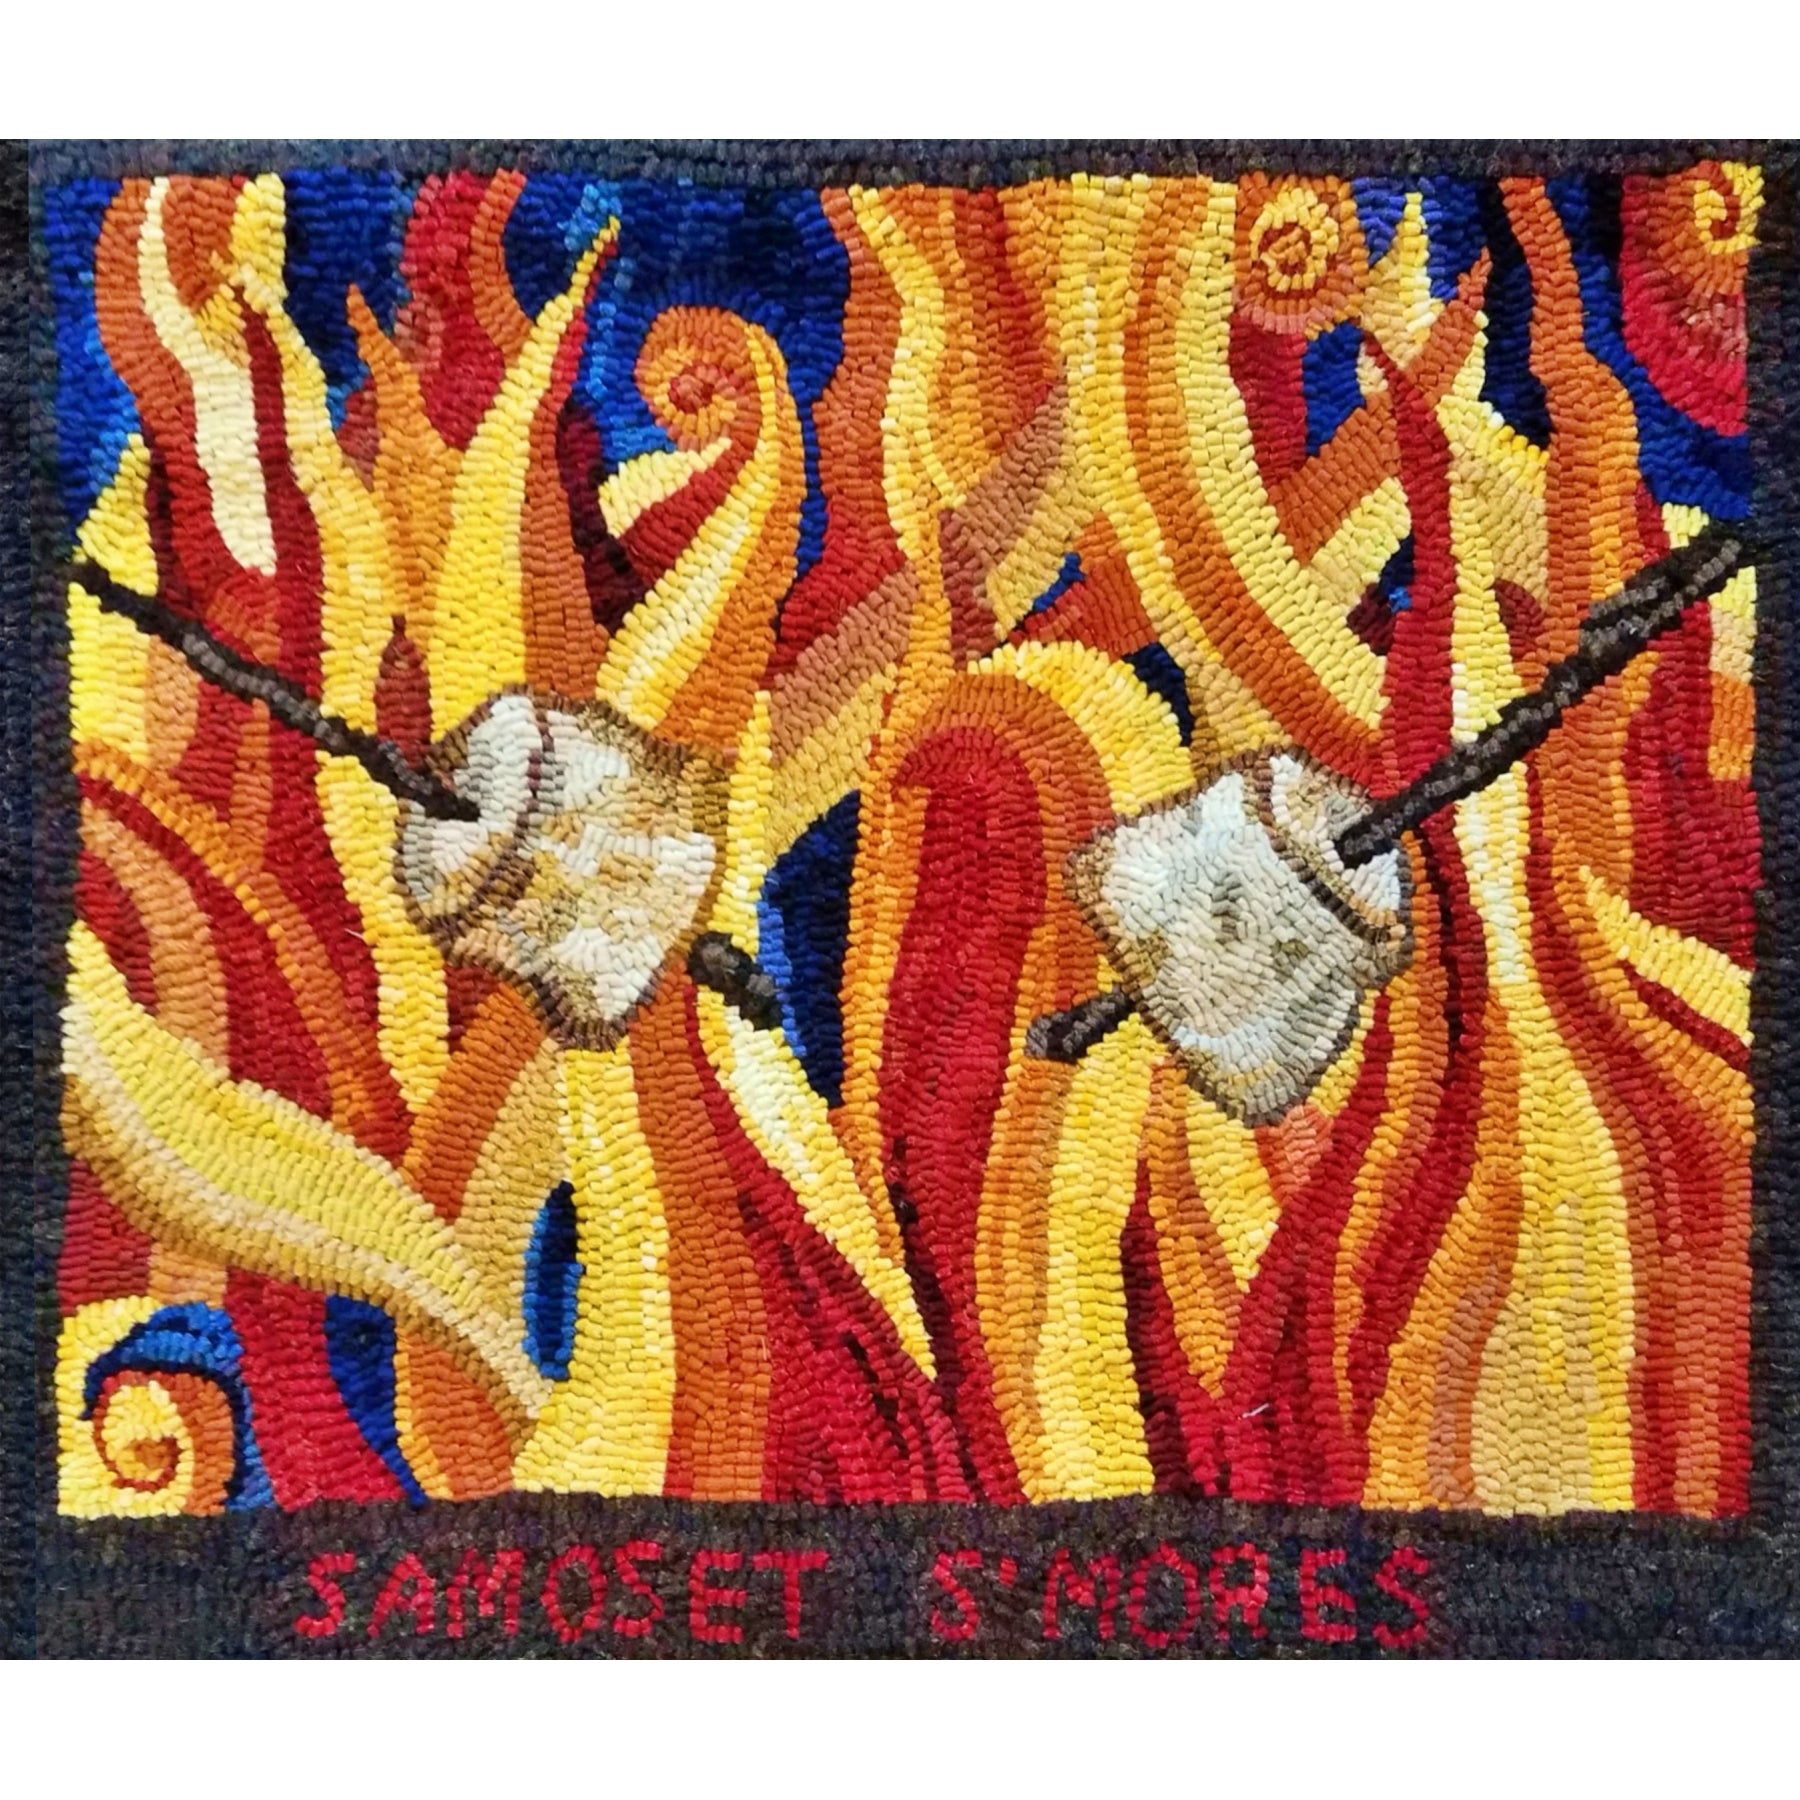 S'more Fun, rug hooked by Meredith Harris